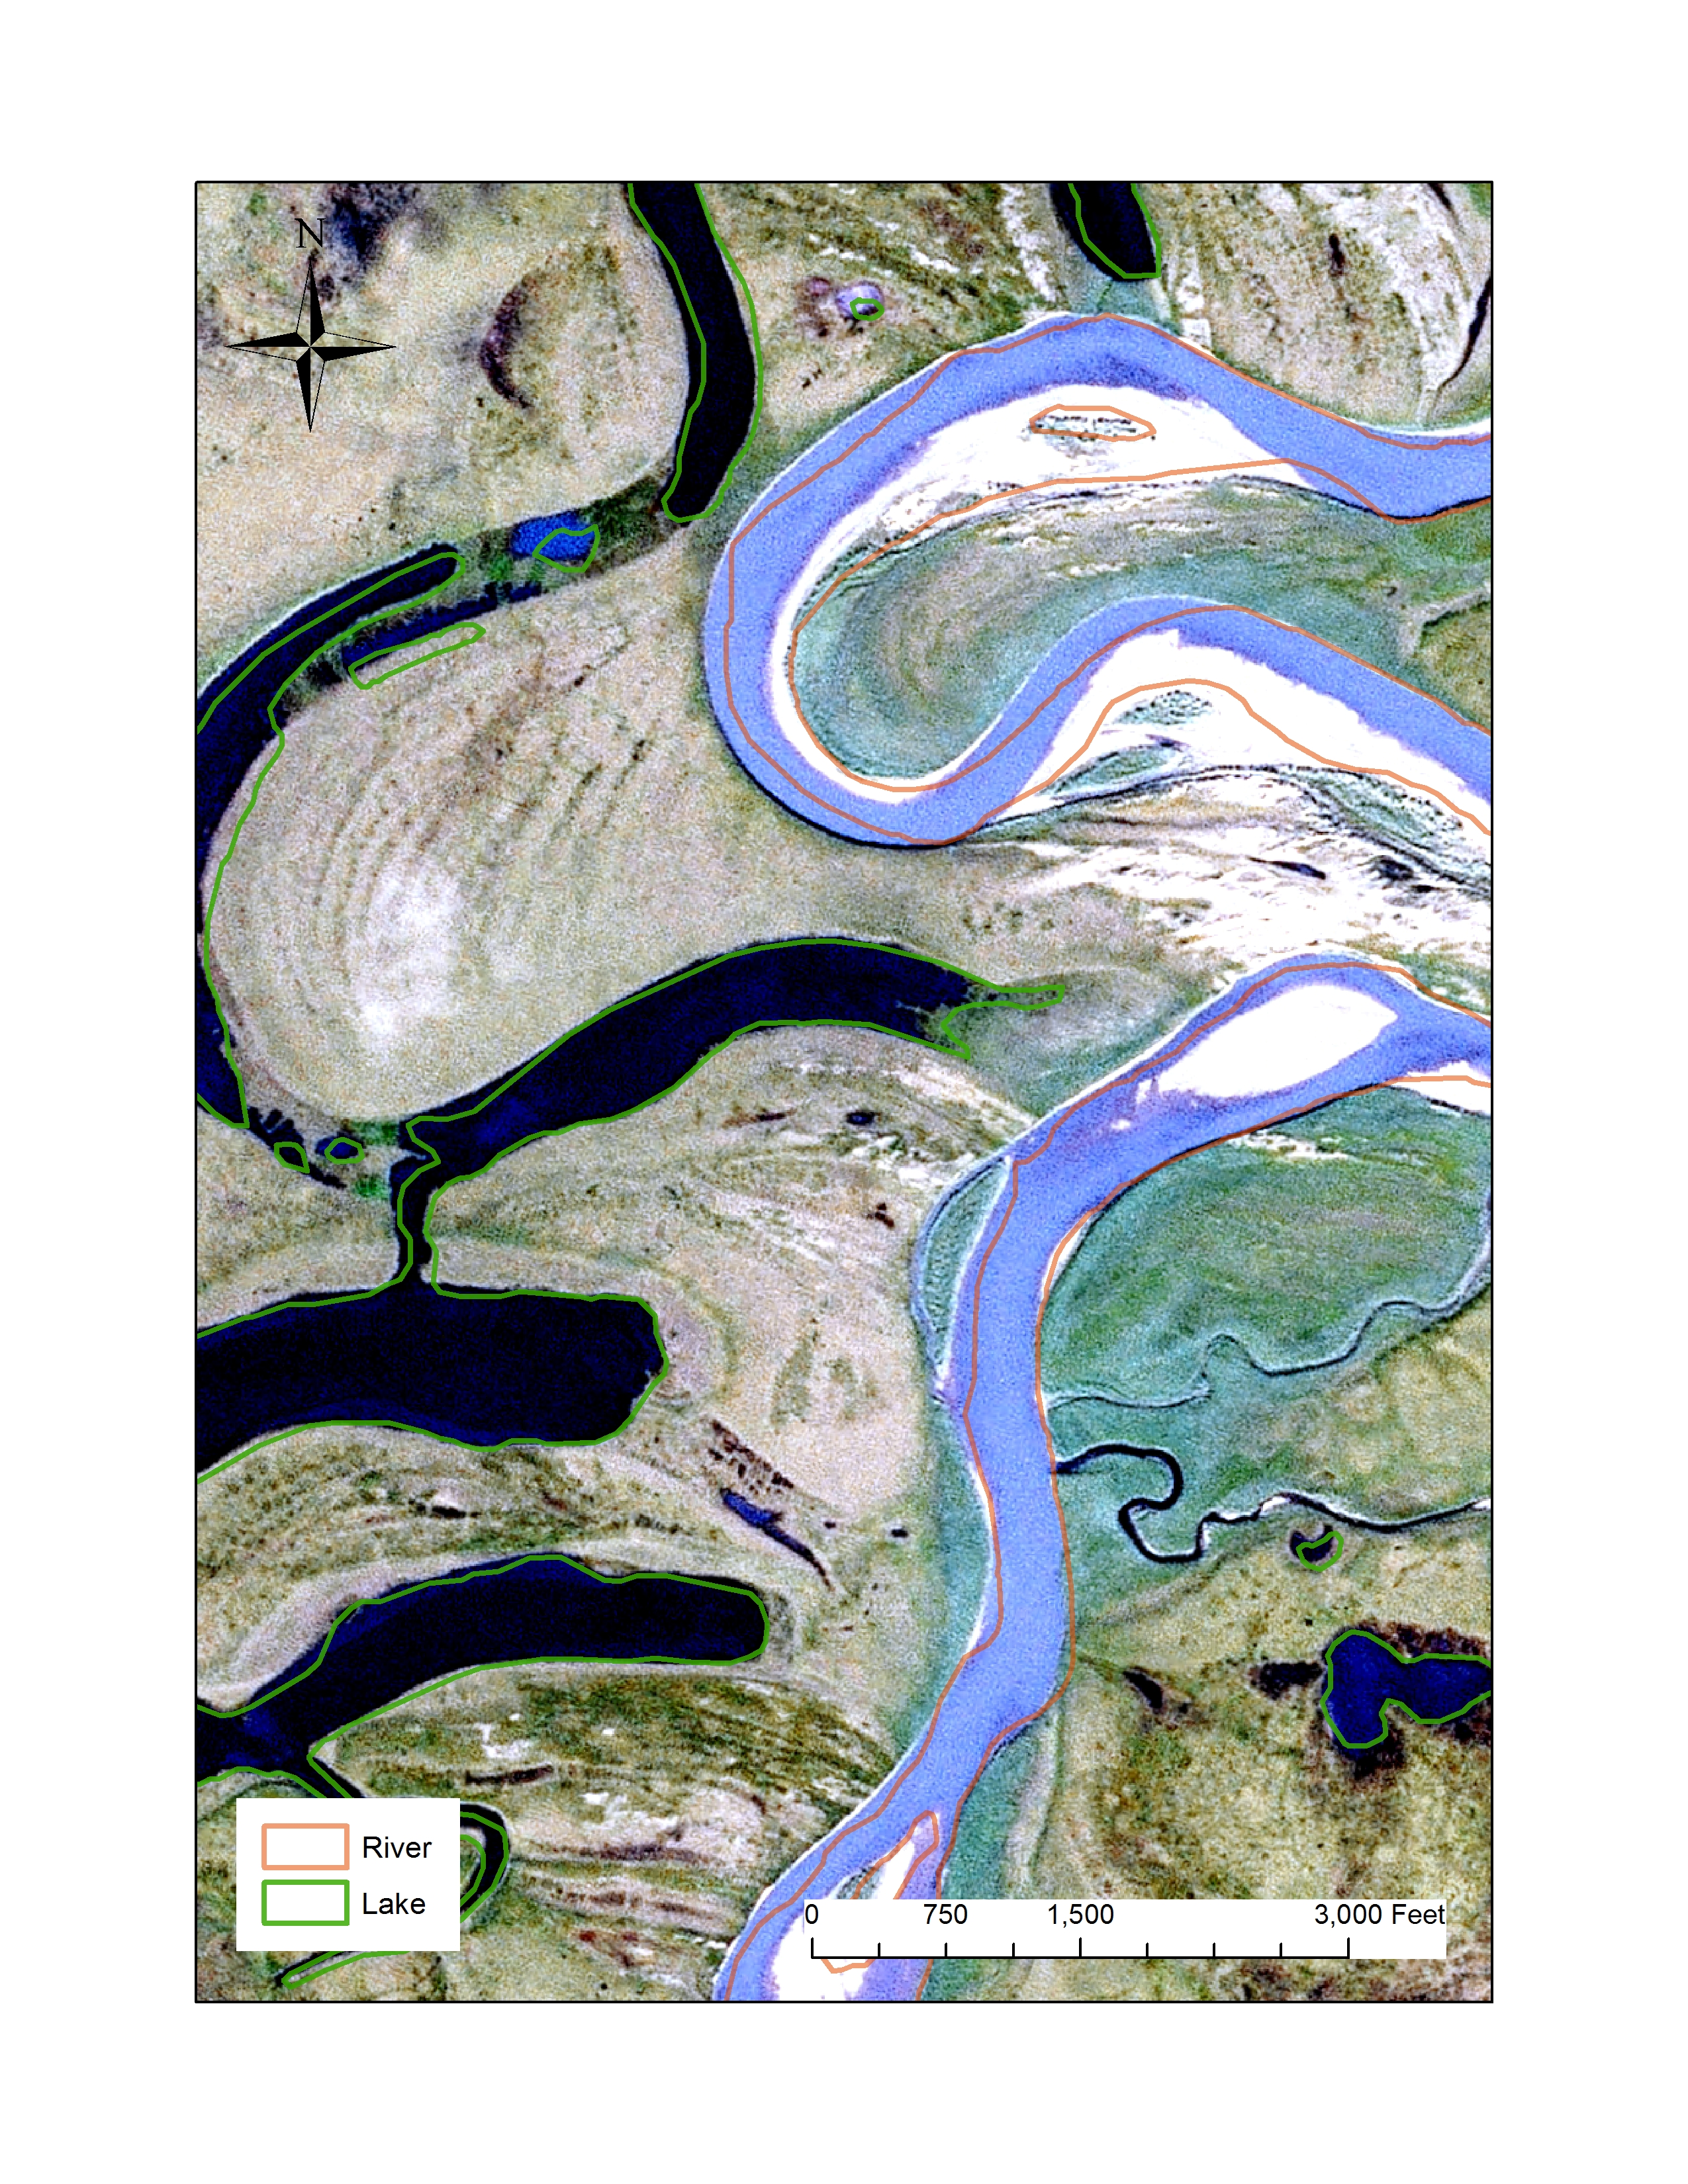 National Hydrography Dataset features shown on SPOT image.